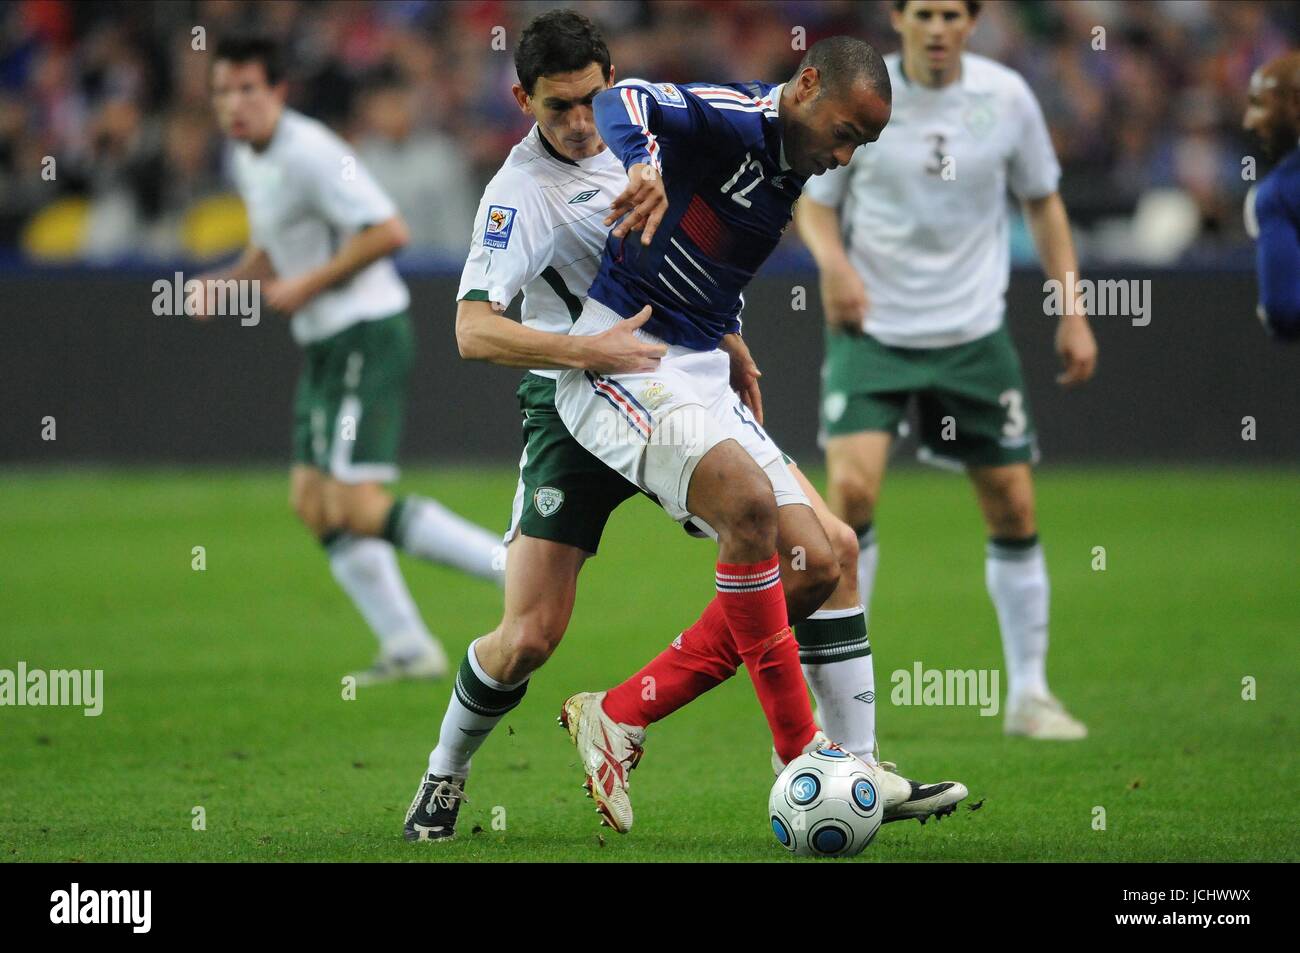 KEITH ANDREWS & THIERRY HENRY FRANCE V REPUBLIC OF IRELAND FRANCE V REPUBLIC OF IRELAND STADE DE FRANCE, PARIS, FRANCE 18 November 2009 GAB4357     WARNING! This Photograph May Only Be Used For Newspaper And/Or Magazine Editorial Purposes. May Not Be Used For, Internet/Online Usage Nor For Publications Involving 1 player, 1 Club Or 1 Competition, Without Written Authorisation From Football DataCo Ltd. For Any Queries, Please Contact Football DataCo Ltd on +44 (0) 207 864 9121 Stock Photo